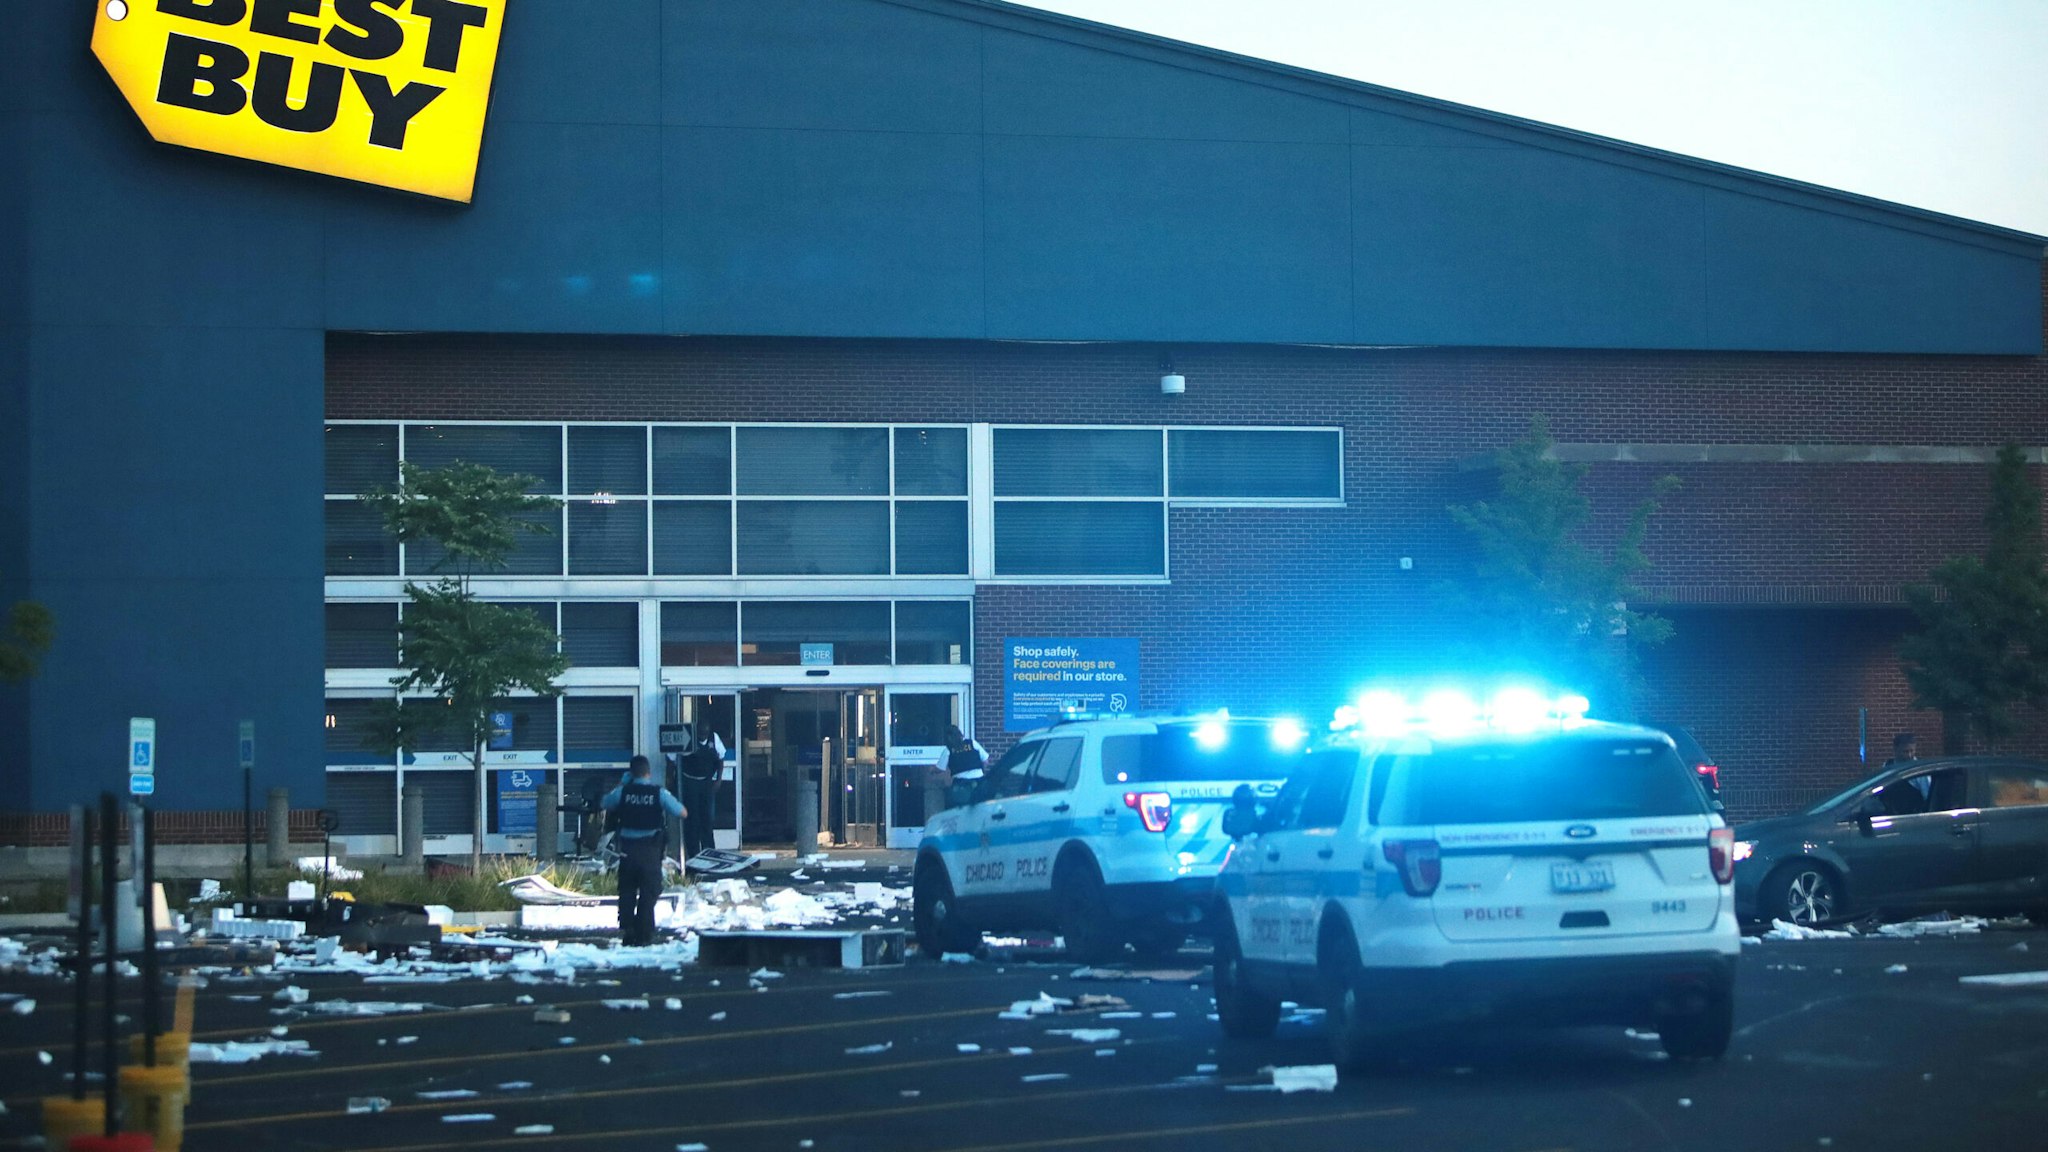 CHICAGO, ILLINOIS - AUGUST 10: A Police officers inspect a damaged Best Buy store after parts of the city had widespread looting and vandalism, on August 10, 2020 in Chicago, Illinois. Police made several arrests during the night of unrest and recovered at least one firearm.